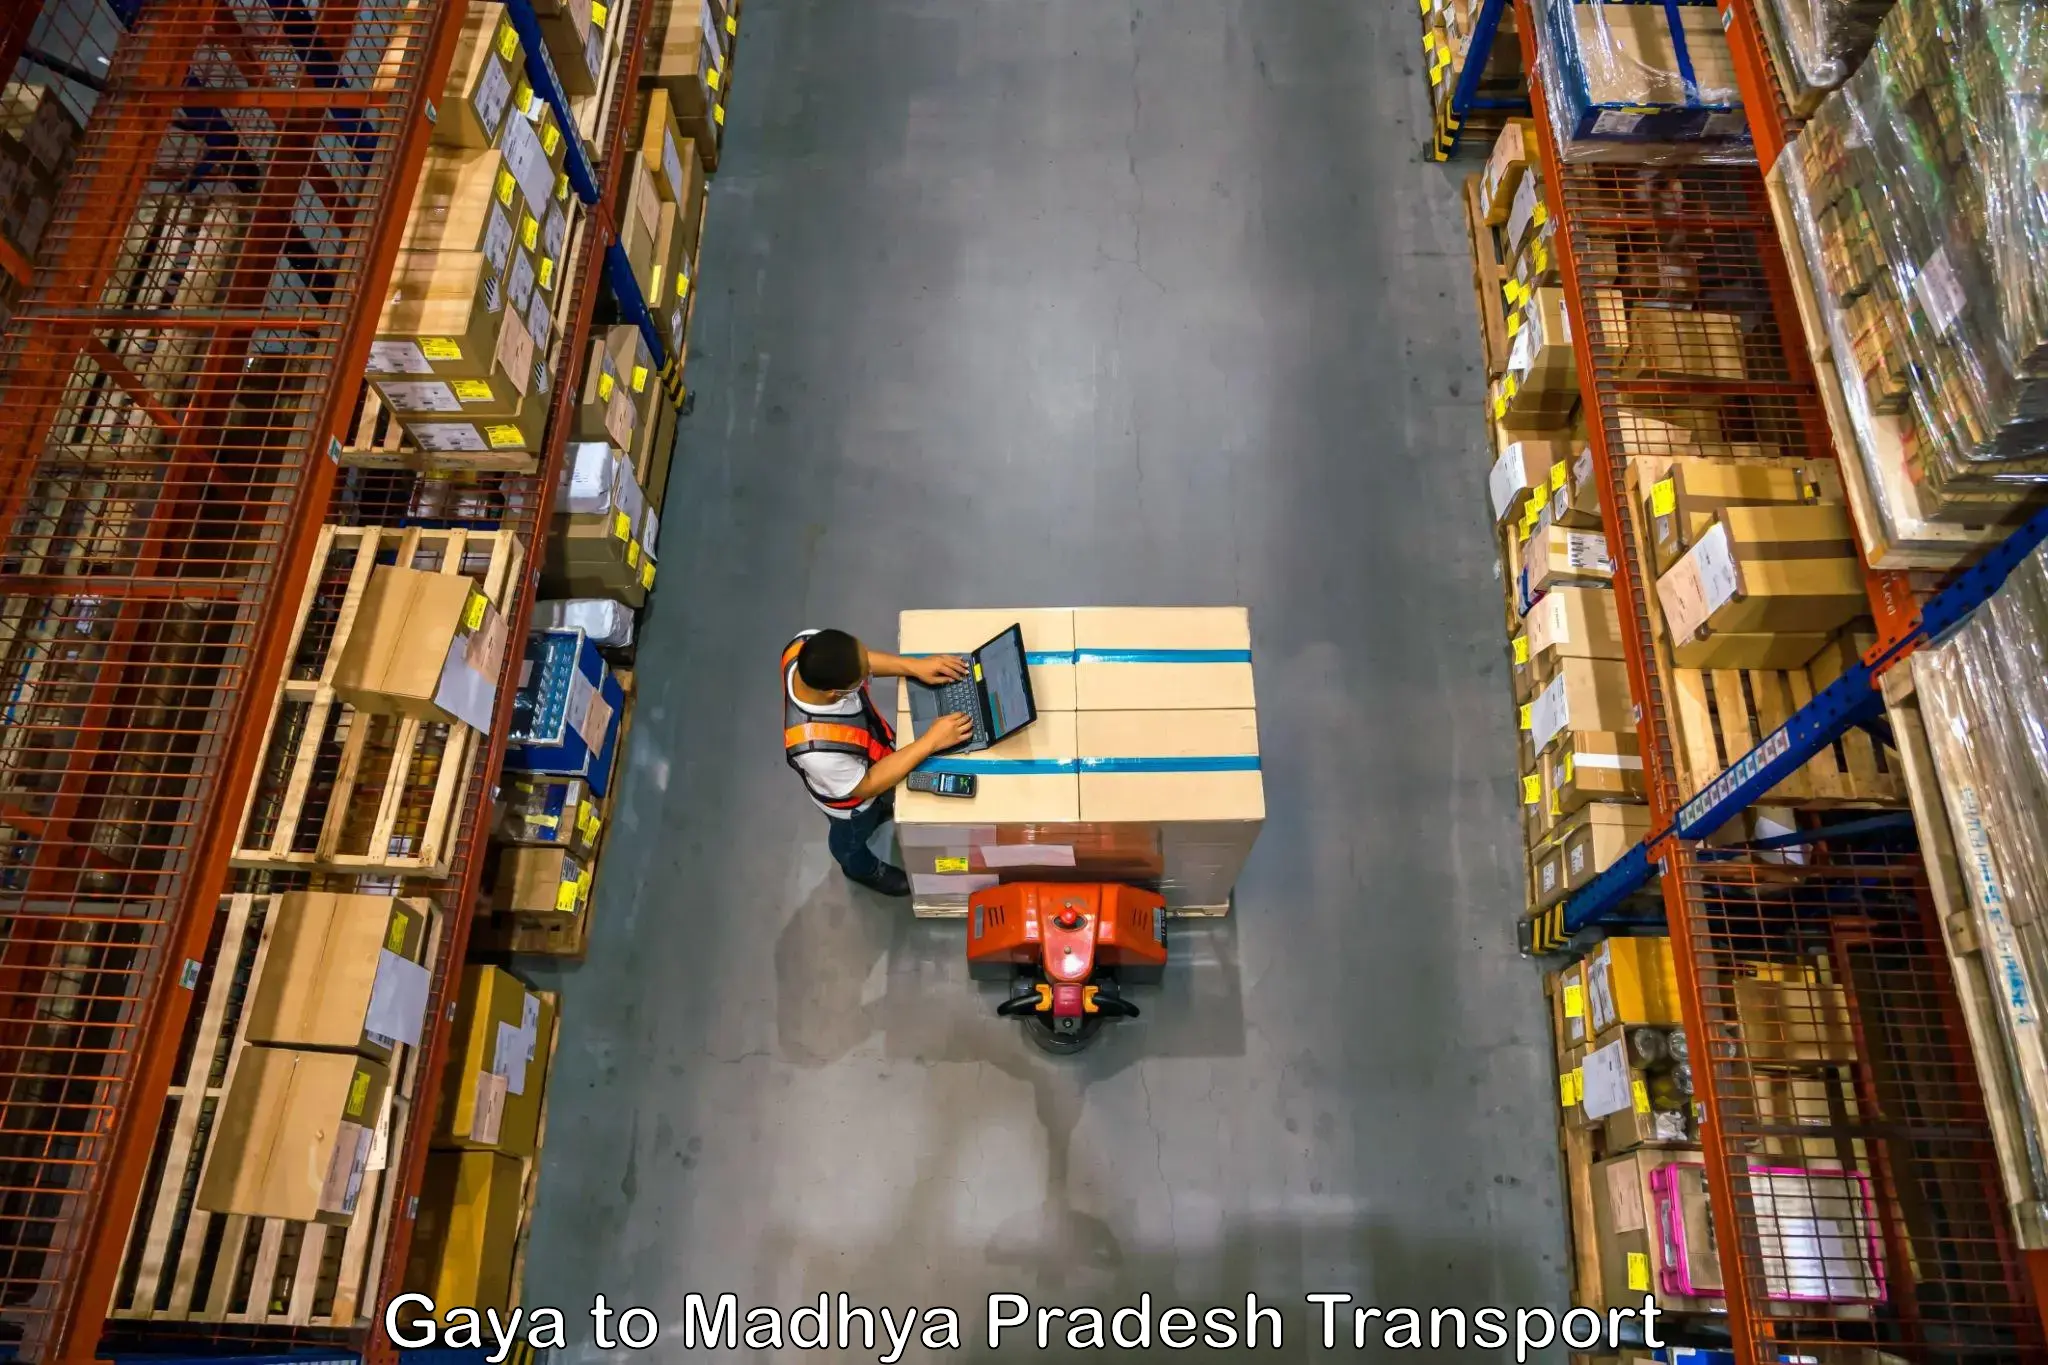 Parcel transport services in Gaya to Chand Chaurai